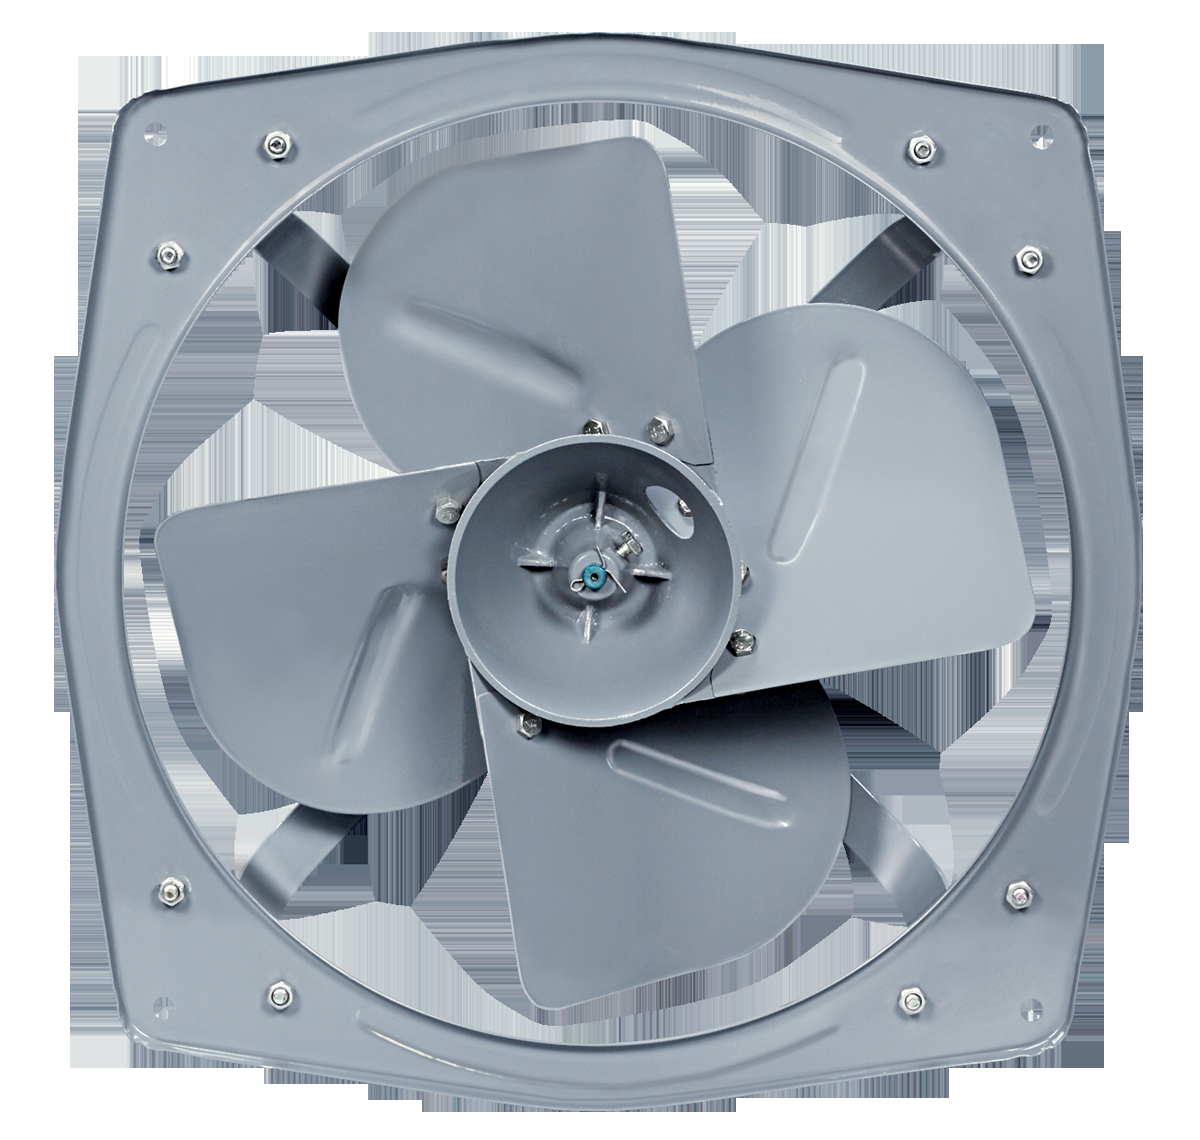 Havells Heavy Duty Exhaust Fan Turboforce 1400 Rpm Havells with regard to size 1200 X 1140